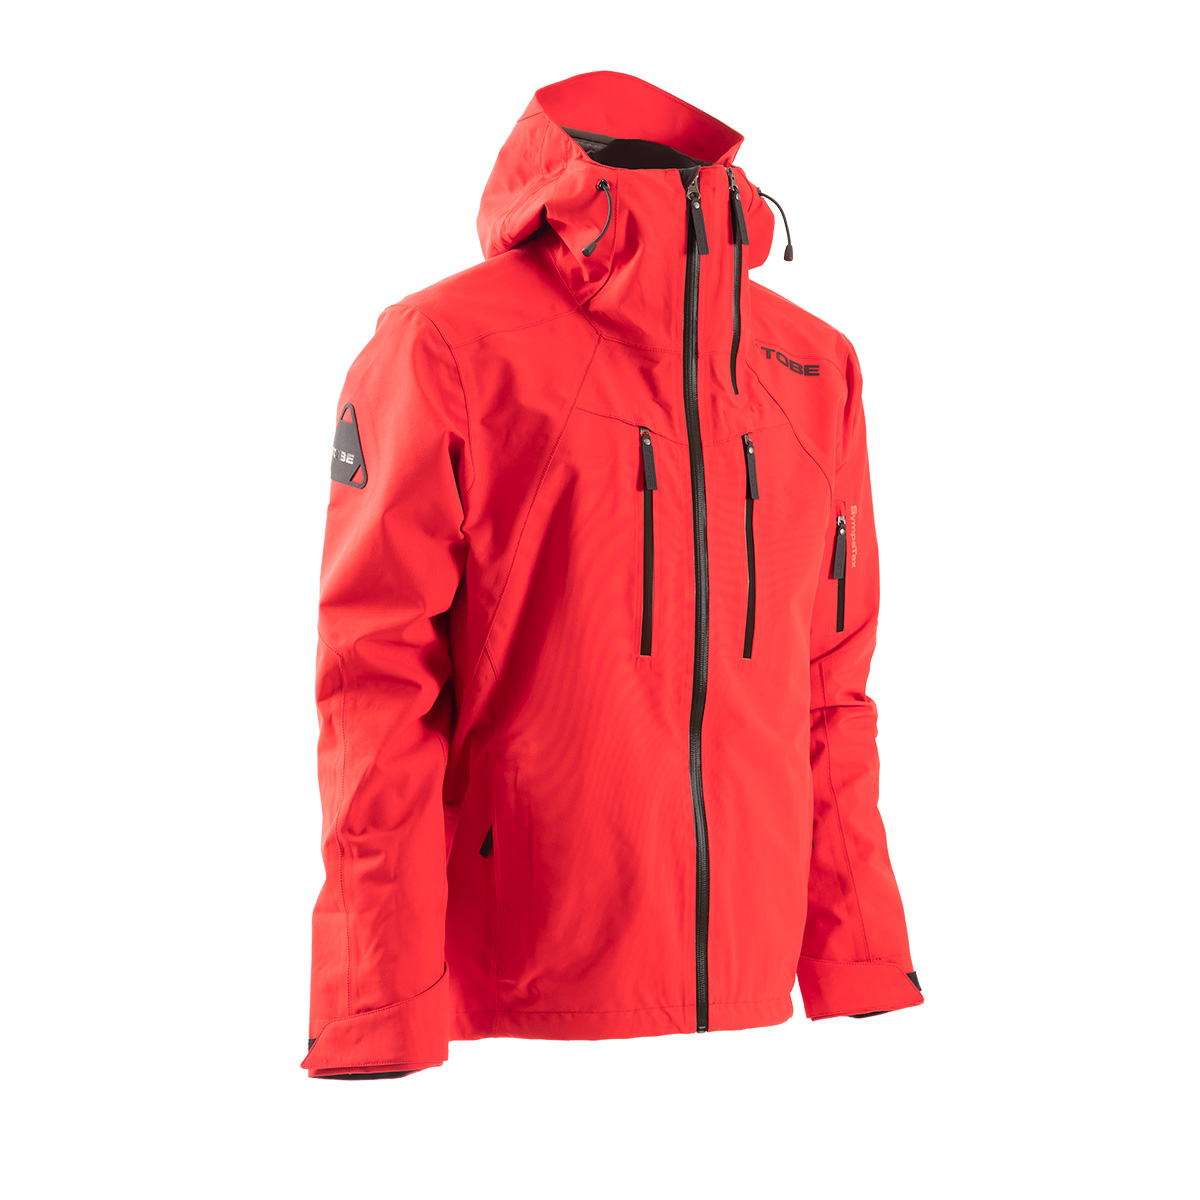 tobe jackets  macer non-insulated - snowmobile